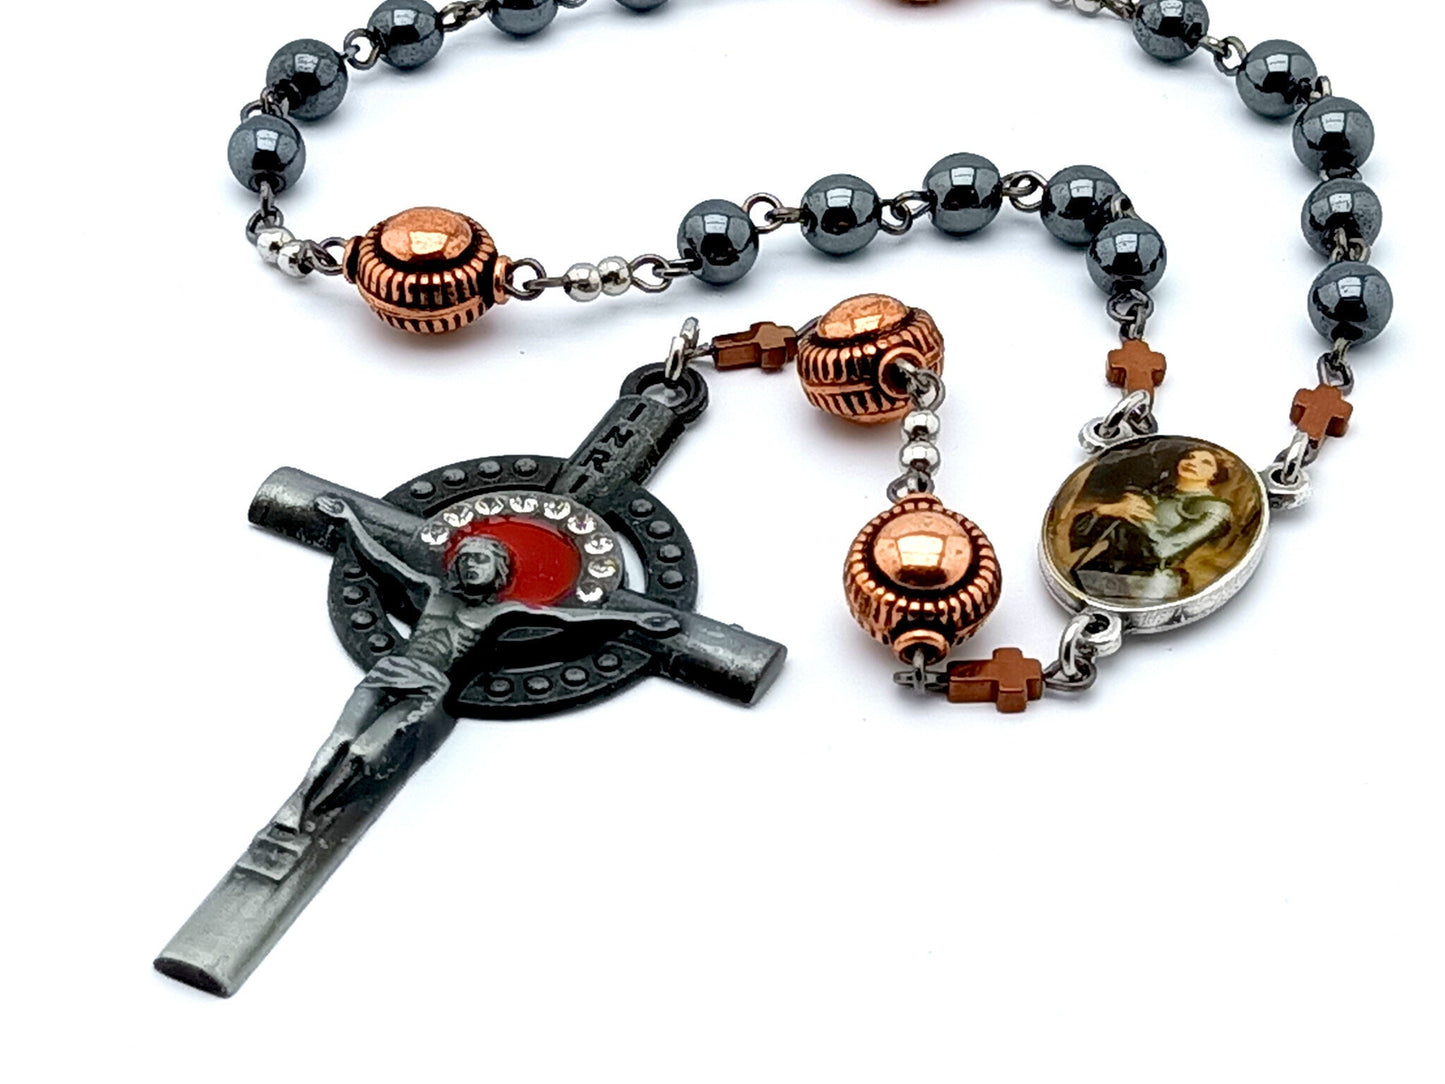 Saint Joan of Arc unique rosary beads prayer chaplet with gemstone and copper beads, pewter crucifix and picture centre medal.